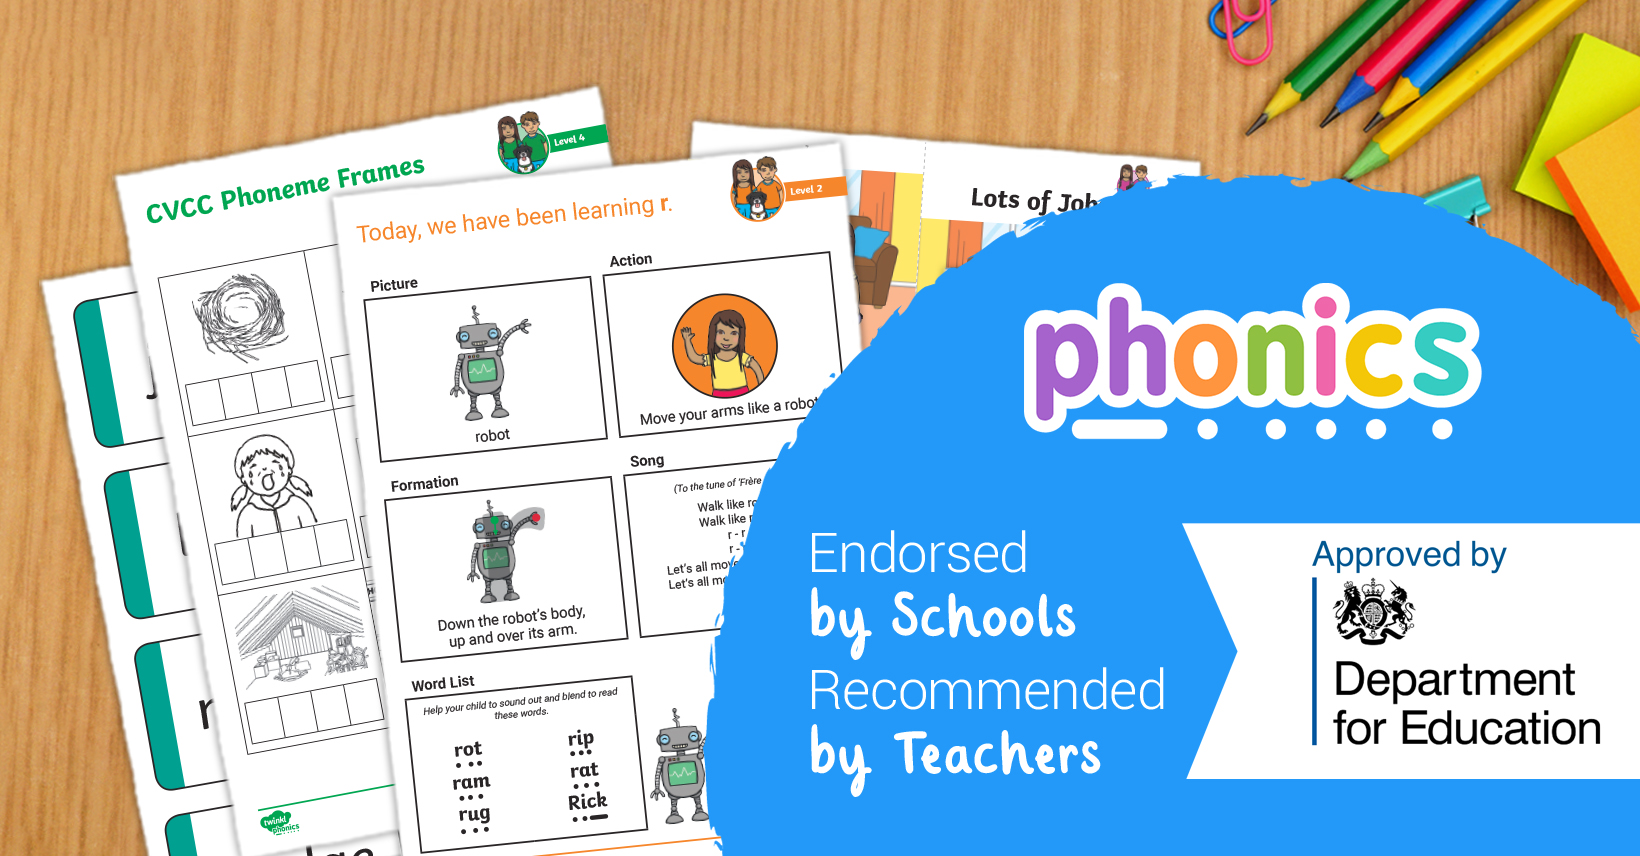 FE News  Twinkl's DfE approved Phonics scheme: a very cost-effective  training programme